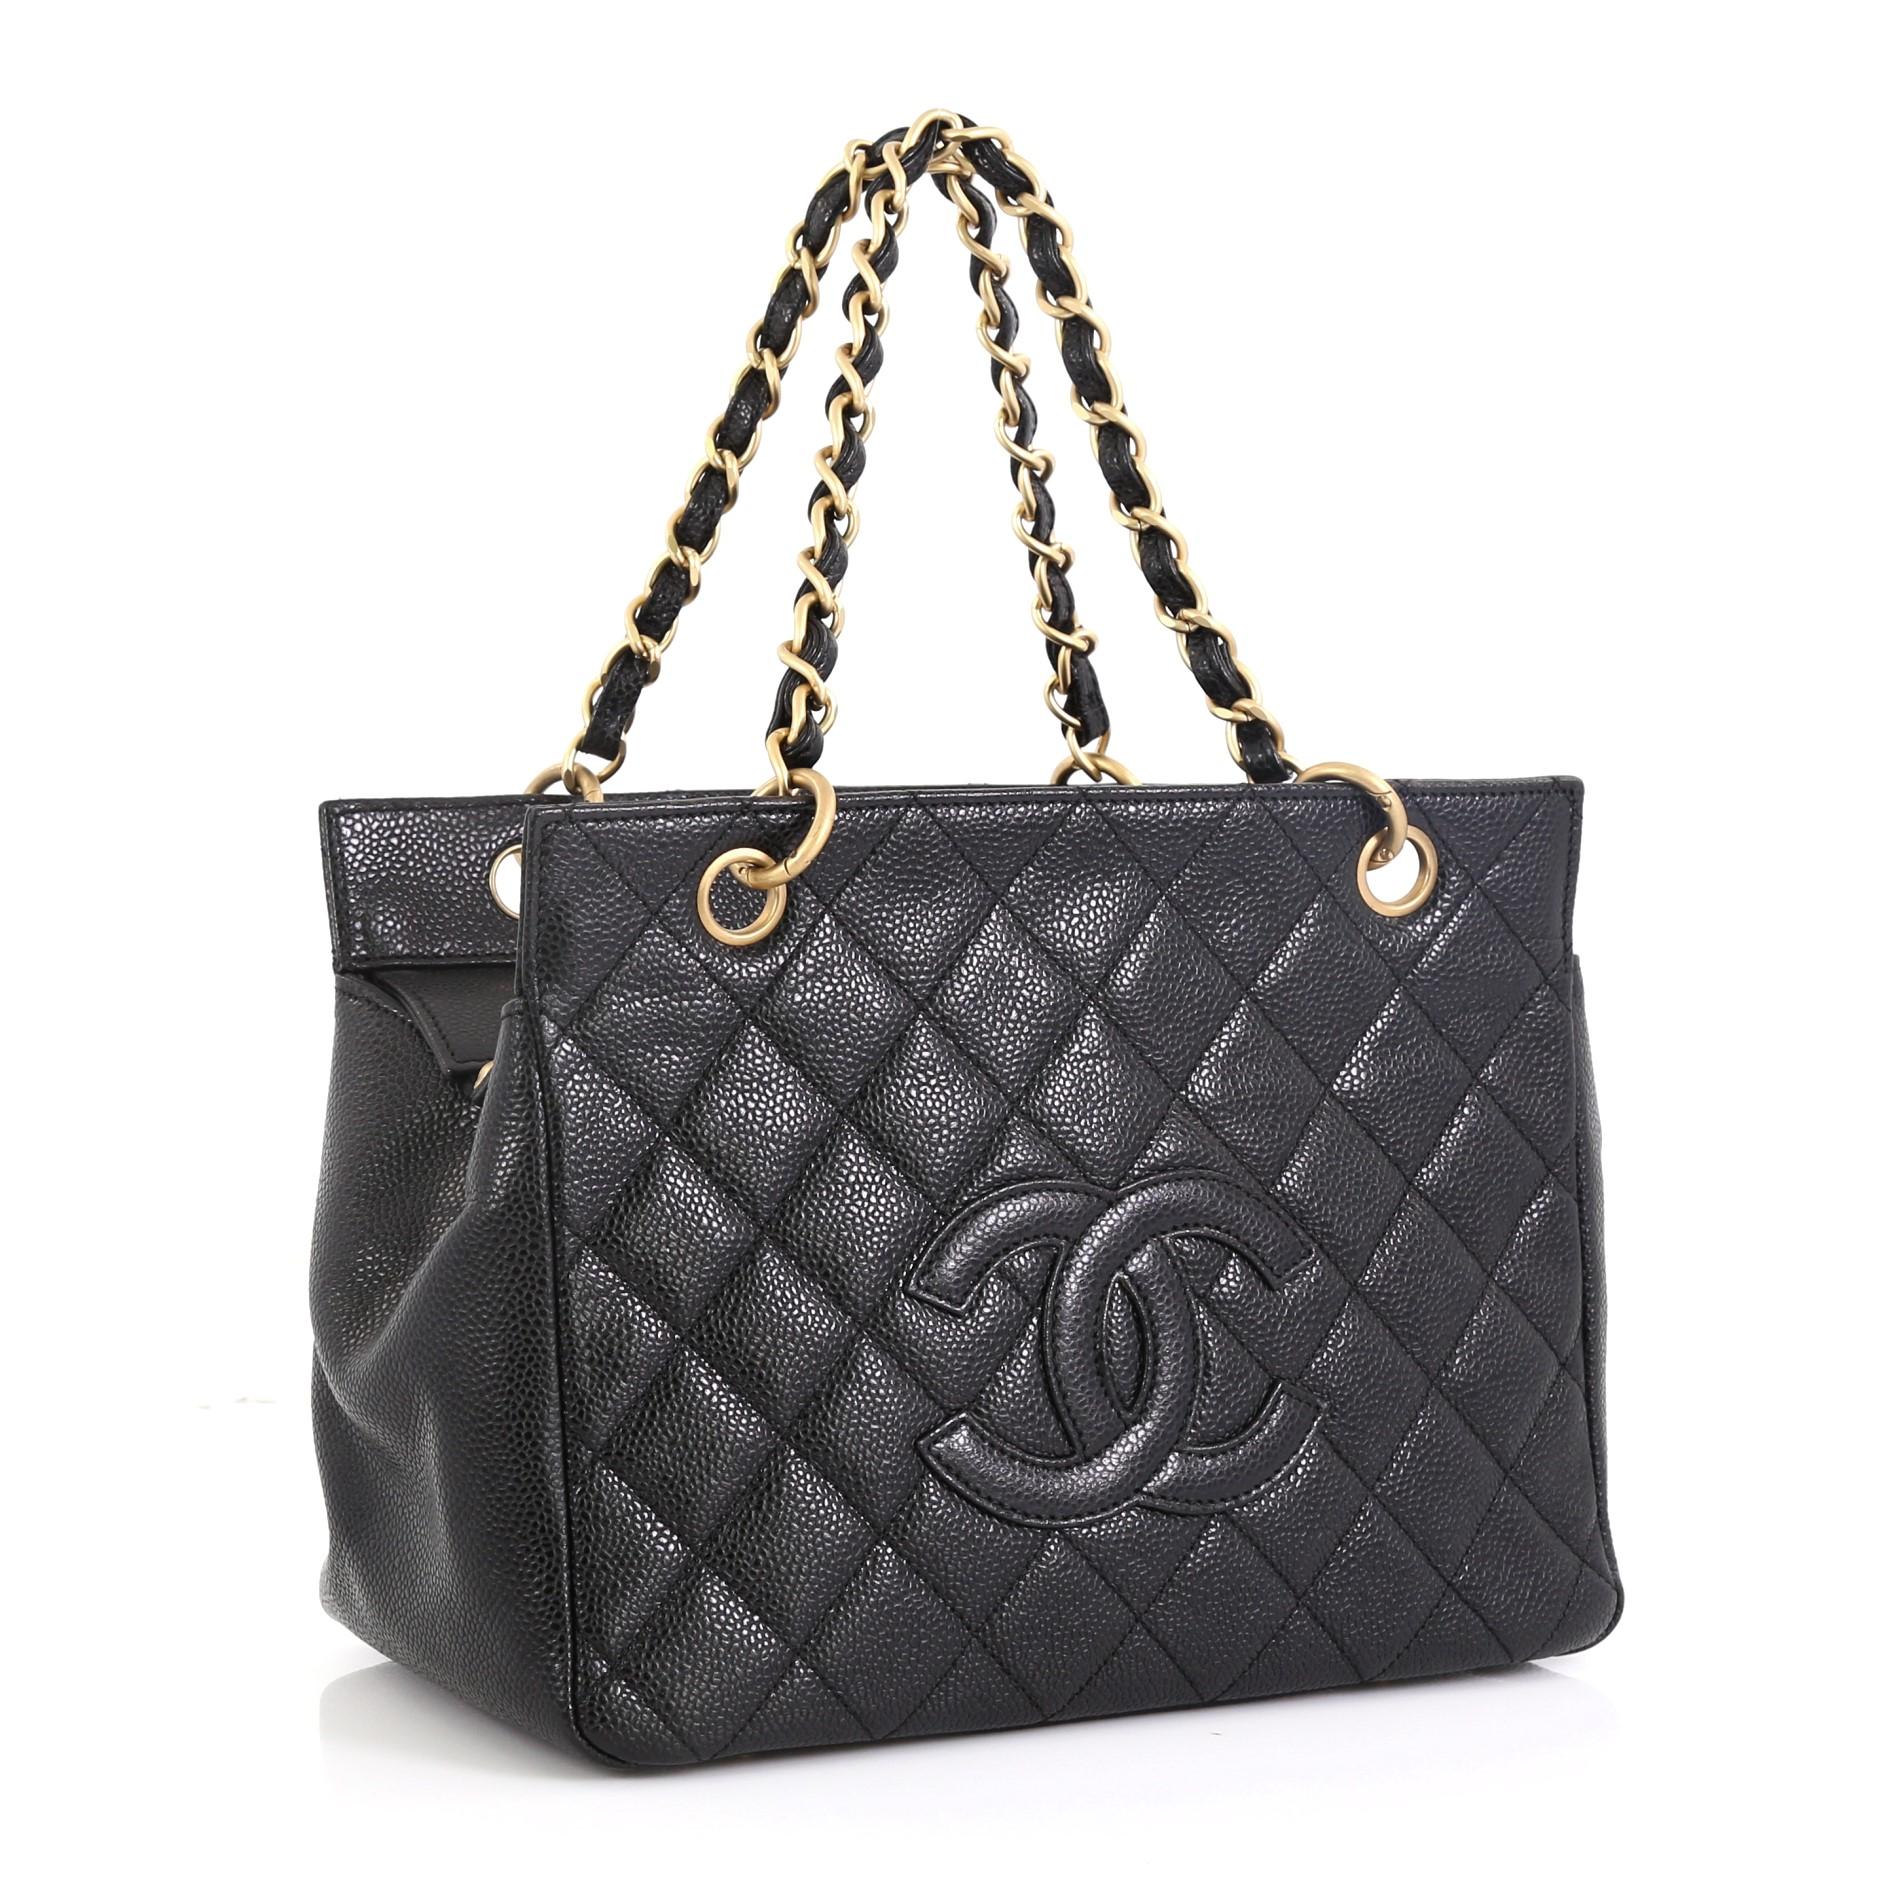 This Chanel Petite Timeless Tote Quilted Caviar, crafted in black quilted caviar leather, features dual woven-in leather chain link straps, interlocking CC logo, and matte gold-tone hardware. Its zip closure opens to a black leather interior with